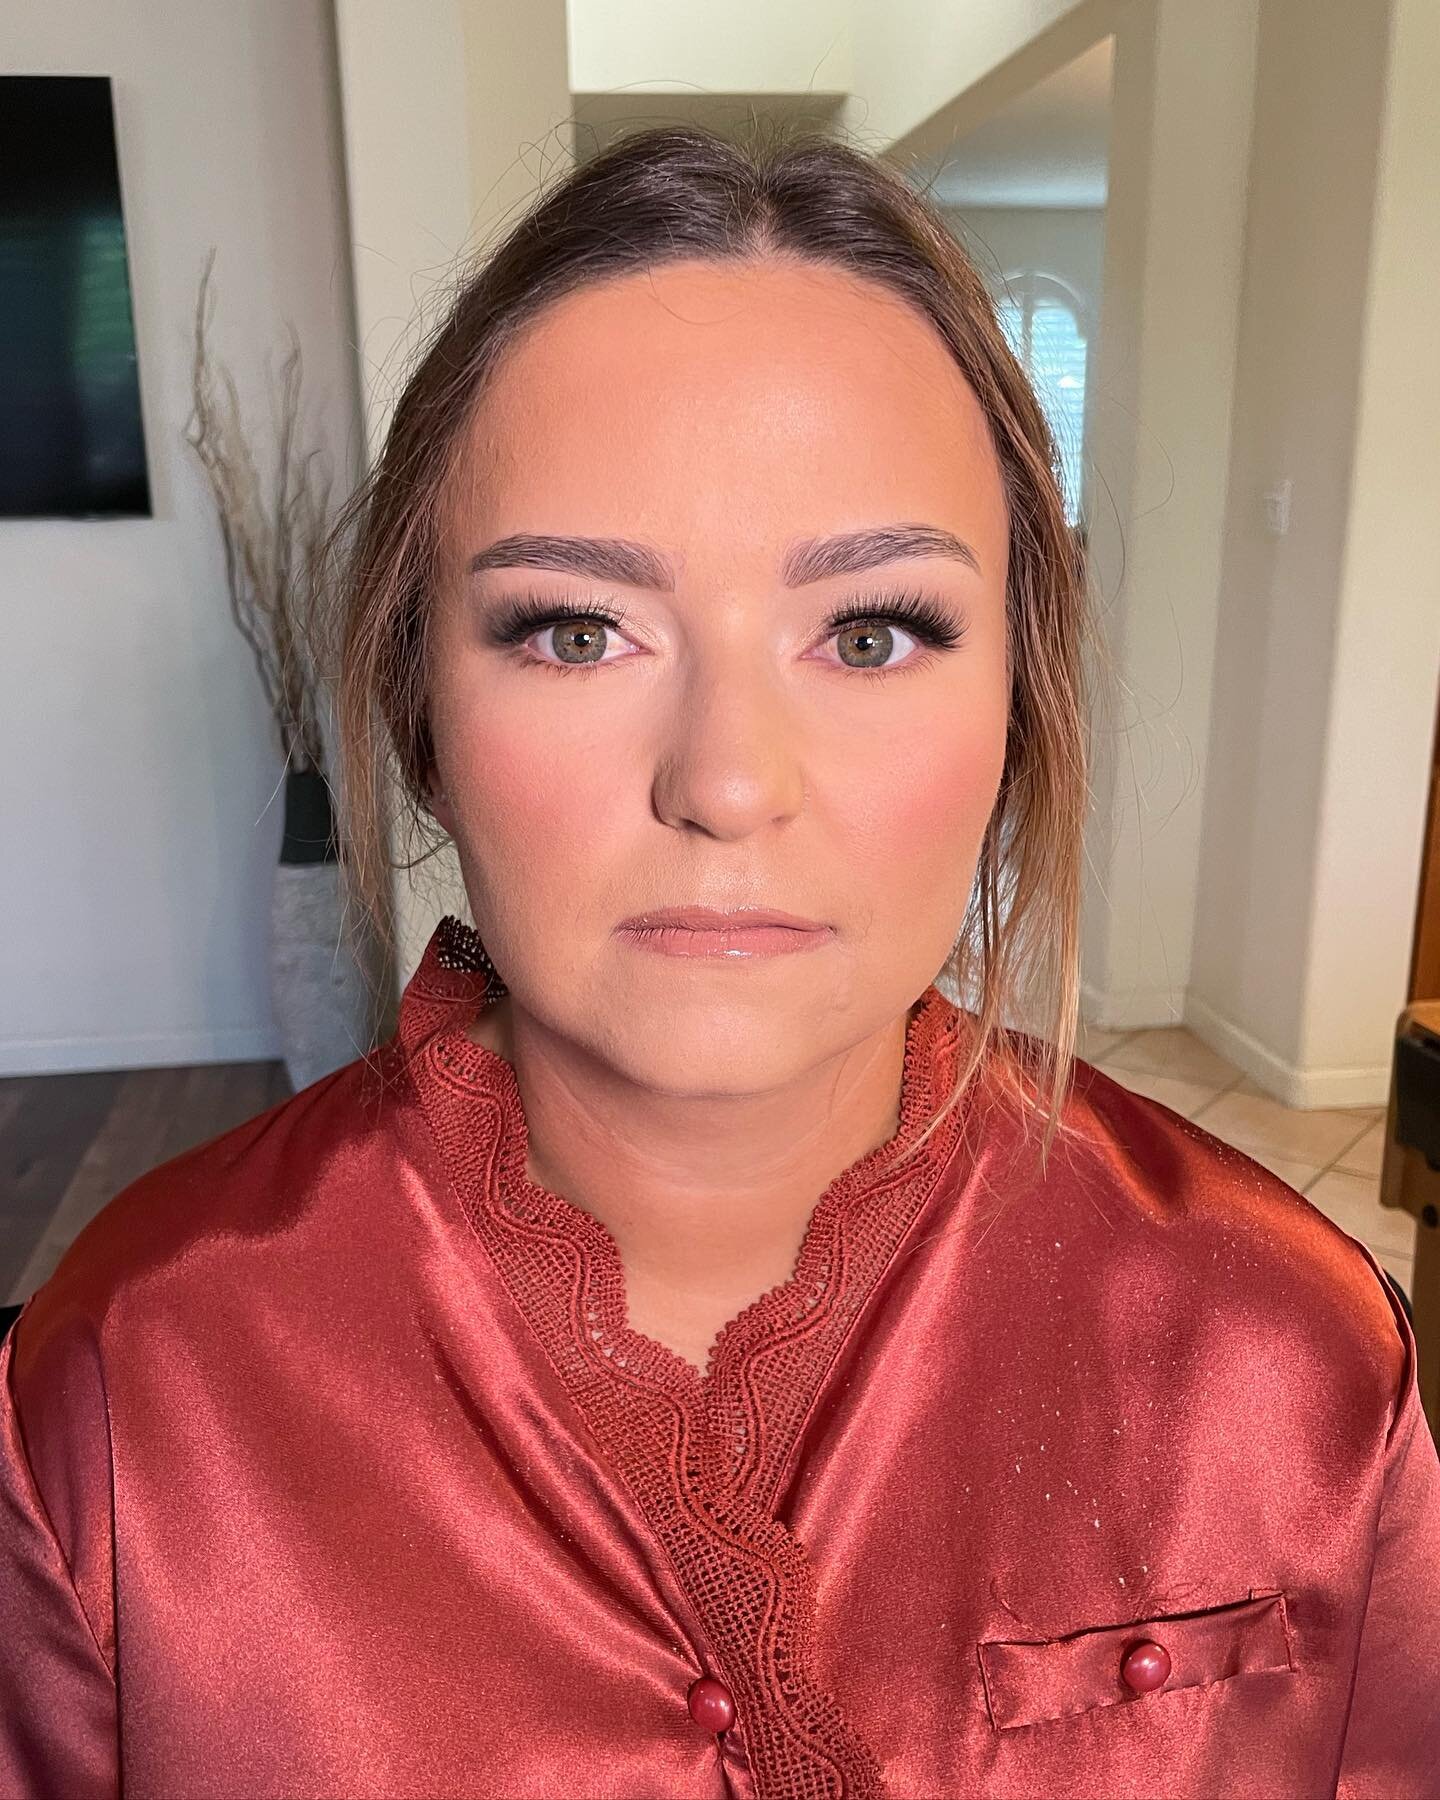 This bridesmaid requested a very neutral look to just enhance her already beautiful features✨
.
.
.
#glamby_elizabeth #lostfiles #softglam #bridalmakeup #bridalglam #bridesmaidmakeup #specialoccasionmakeup #photoshootmakeup #graduationmakeup #quincea